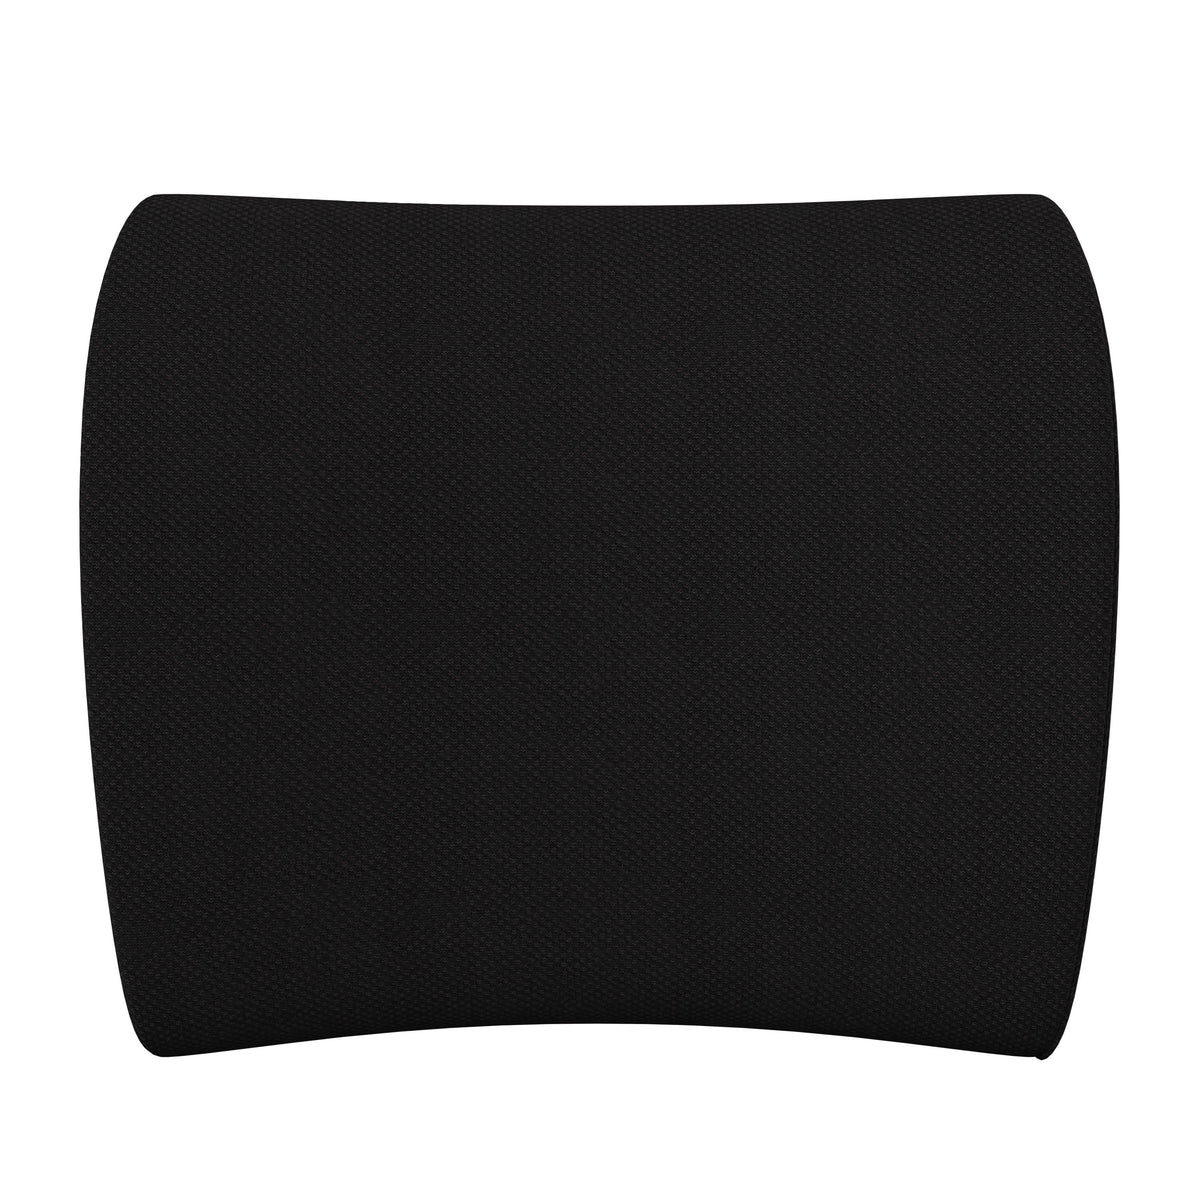 Mobile Adjustable Lumbar Support Pillow for Office Chairs and Car Seats in Black